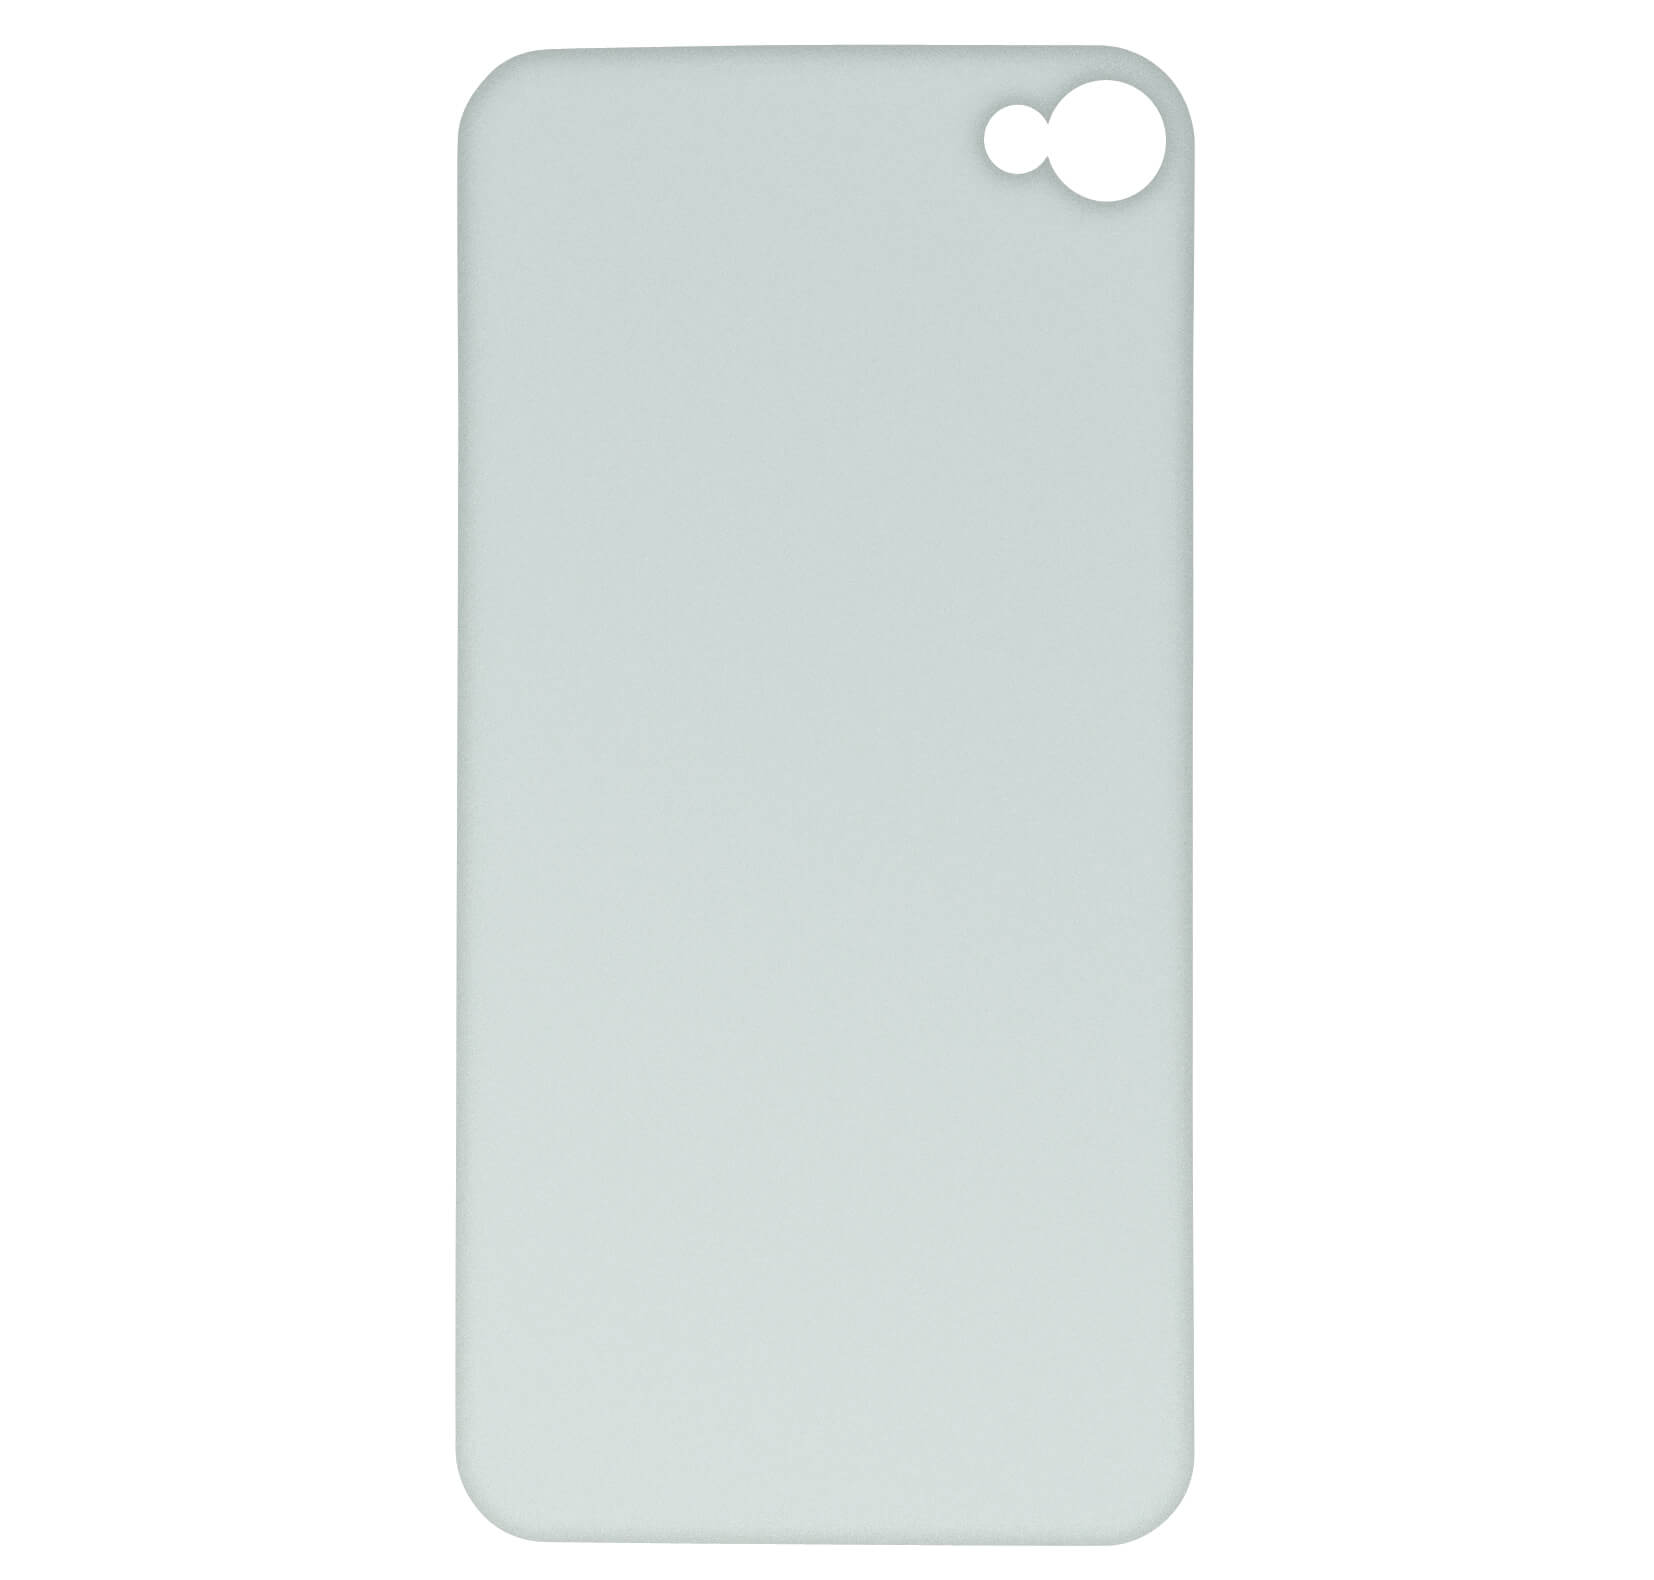 HAMA Back Cover Film for Apple iPh one 5/5s/SE, transparent